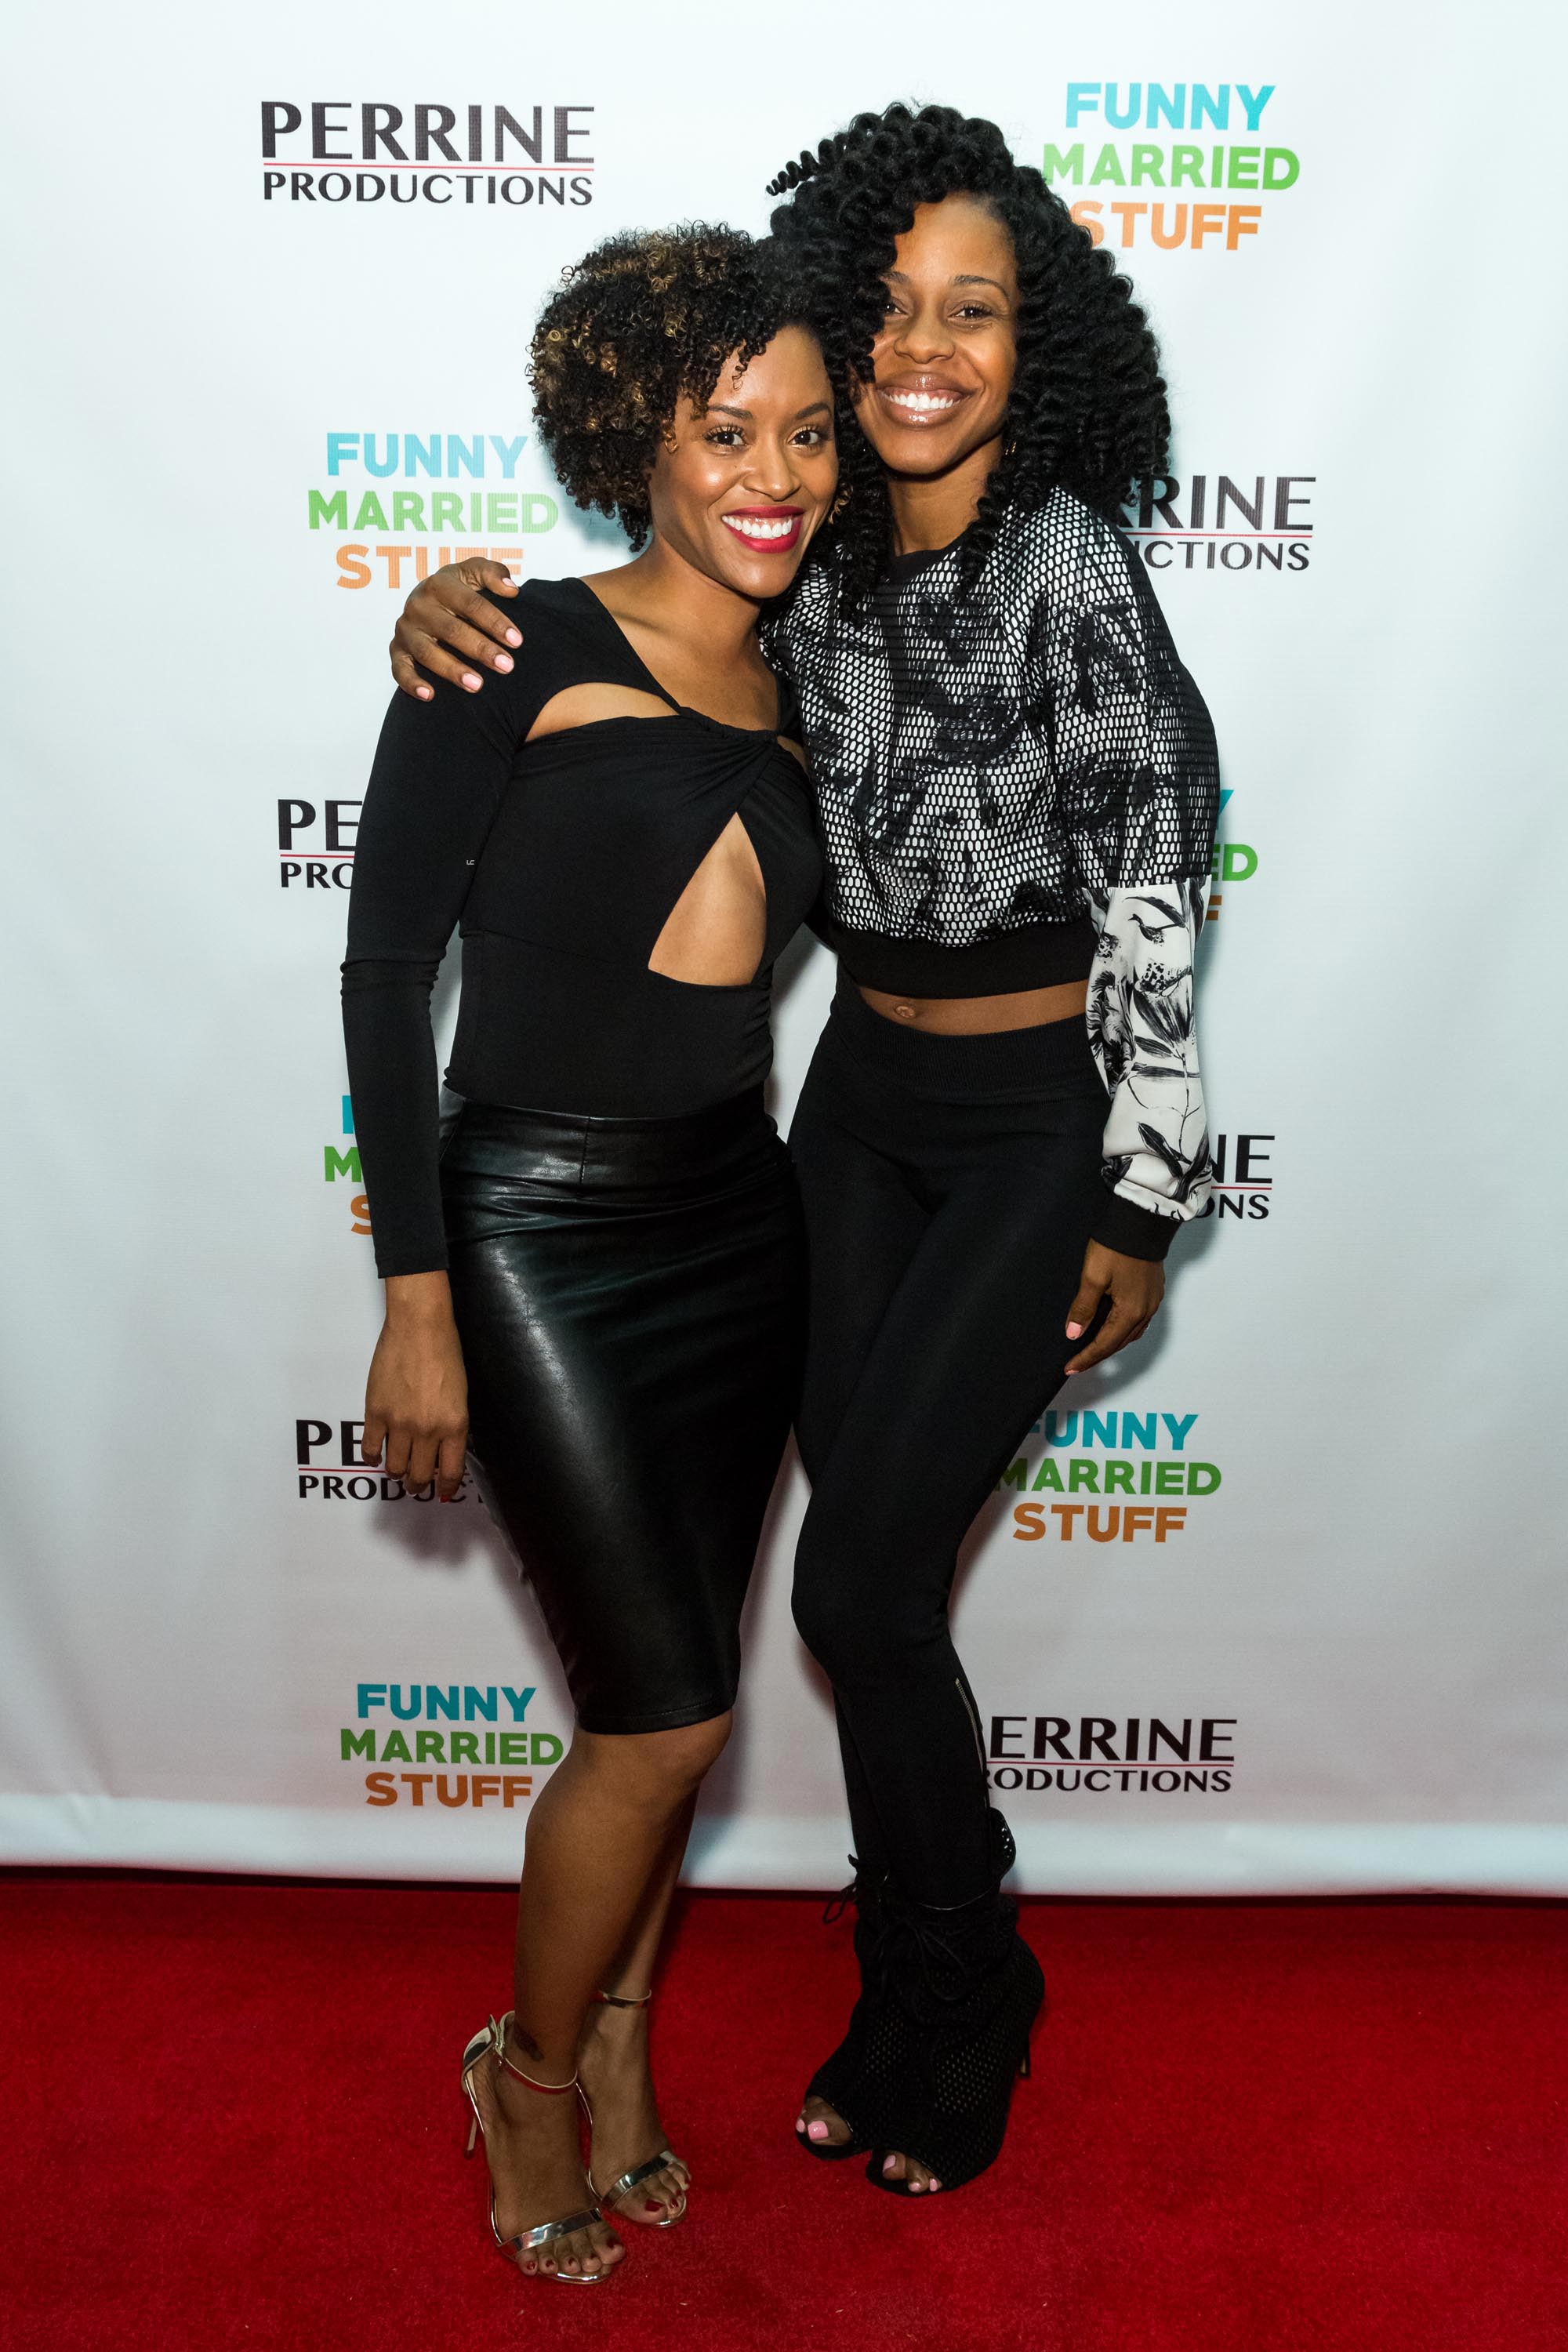 Lony’e Perrine arrives for the Screening Of Perrine Productions’ ‘Funny Married Stuff’